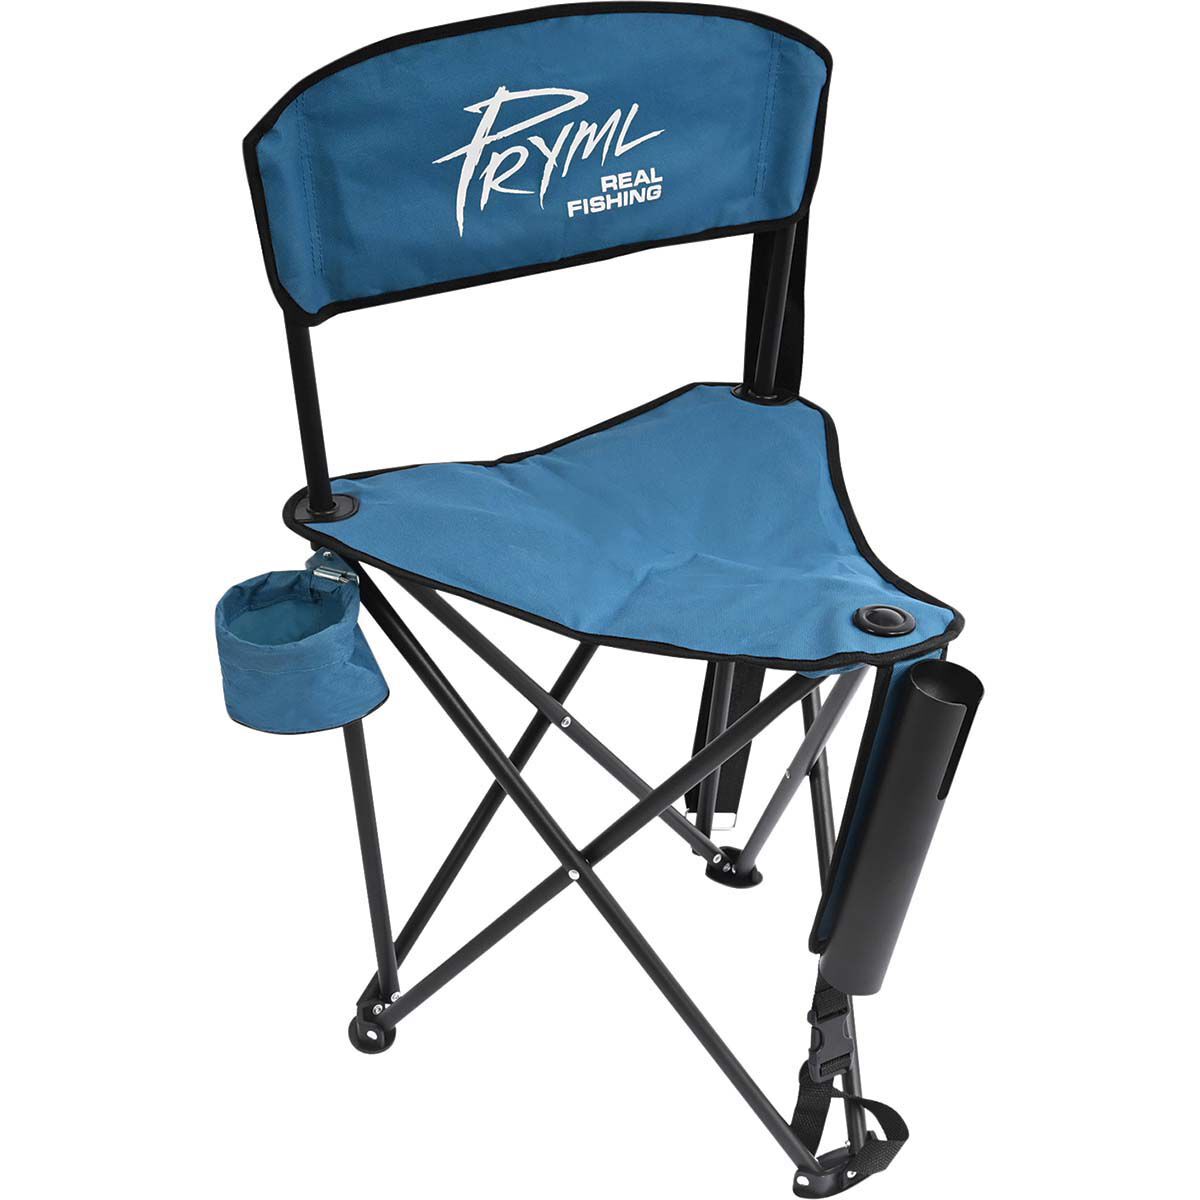 Fishing Chair with Rod Holder Built in Cooler Hands Free Fishing Pole  Holder-Storage Pouch Storage Bag for Accessories Full Size Portable &  Folding